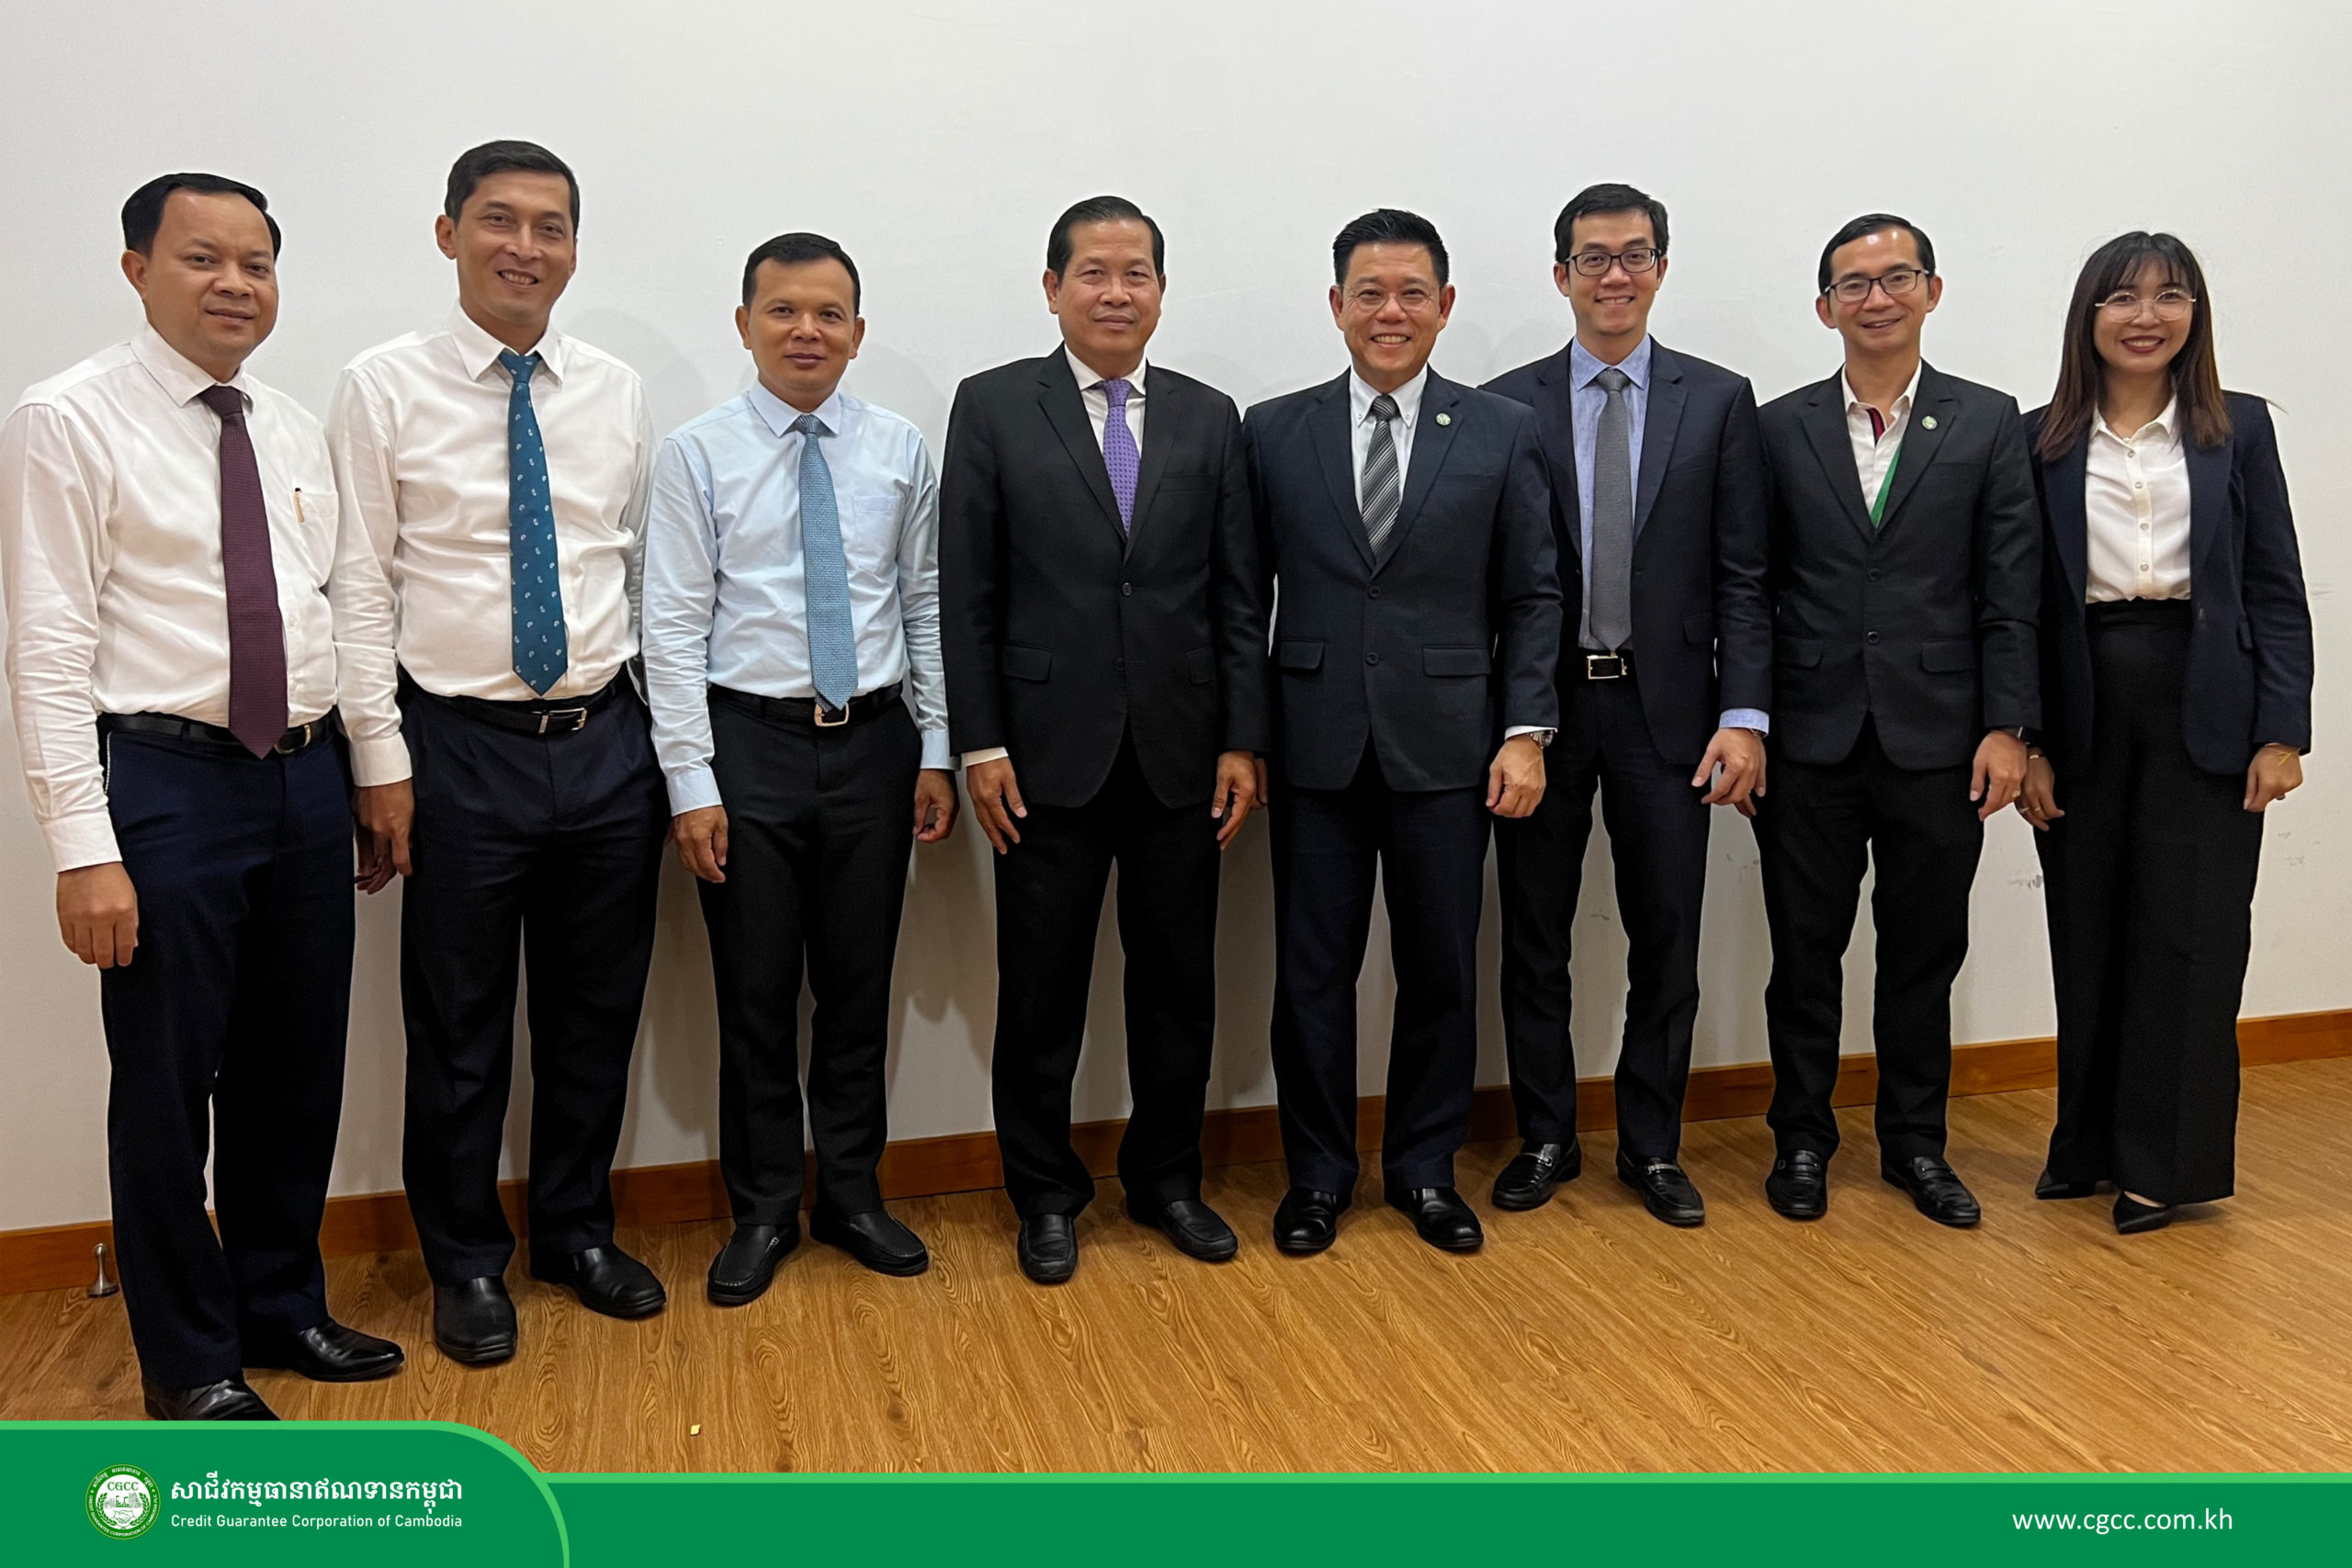 Courtesy visit by CGCC to NBC to discuss on the current situation of the credit market in Cambodia